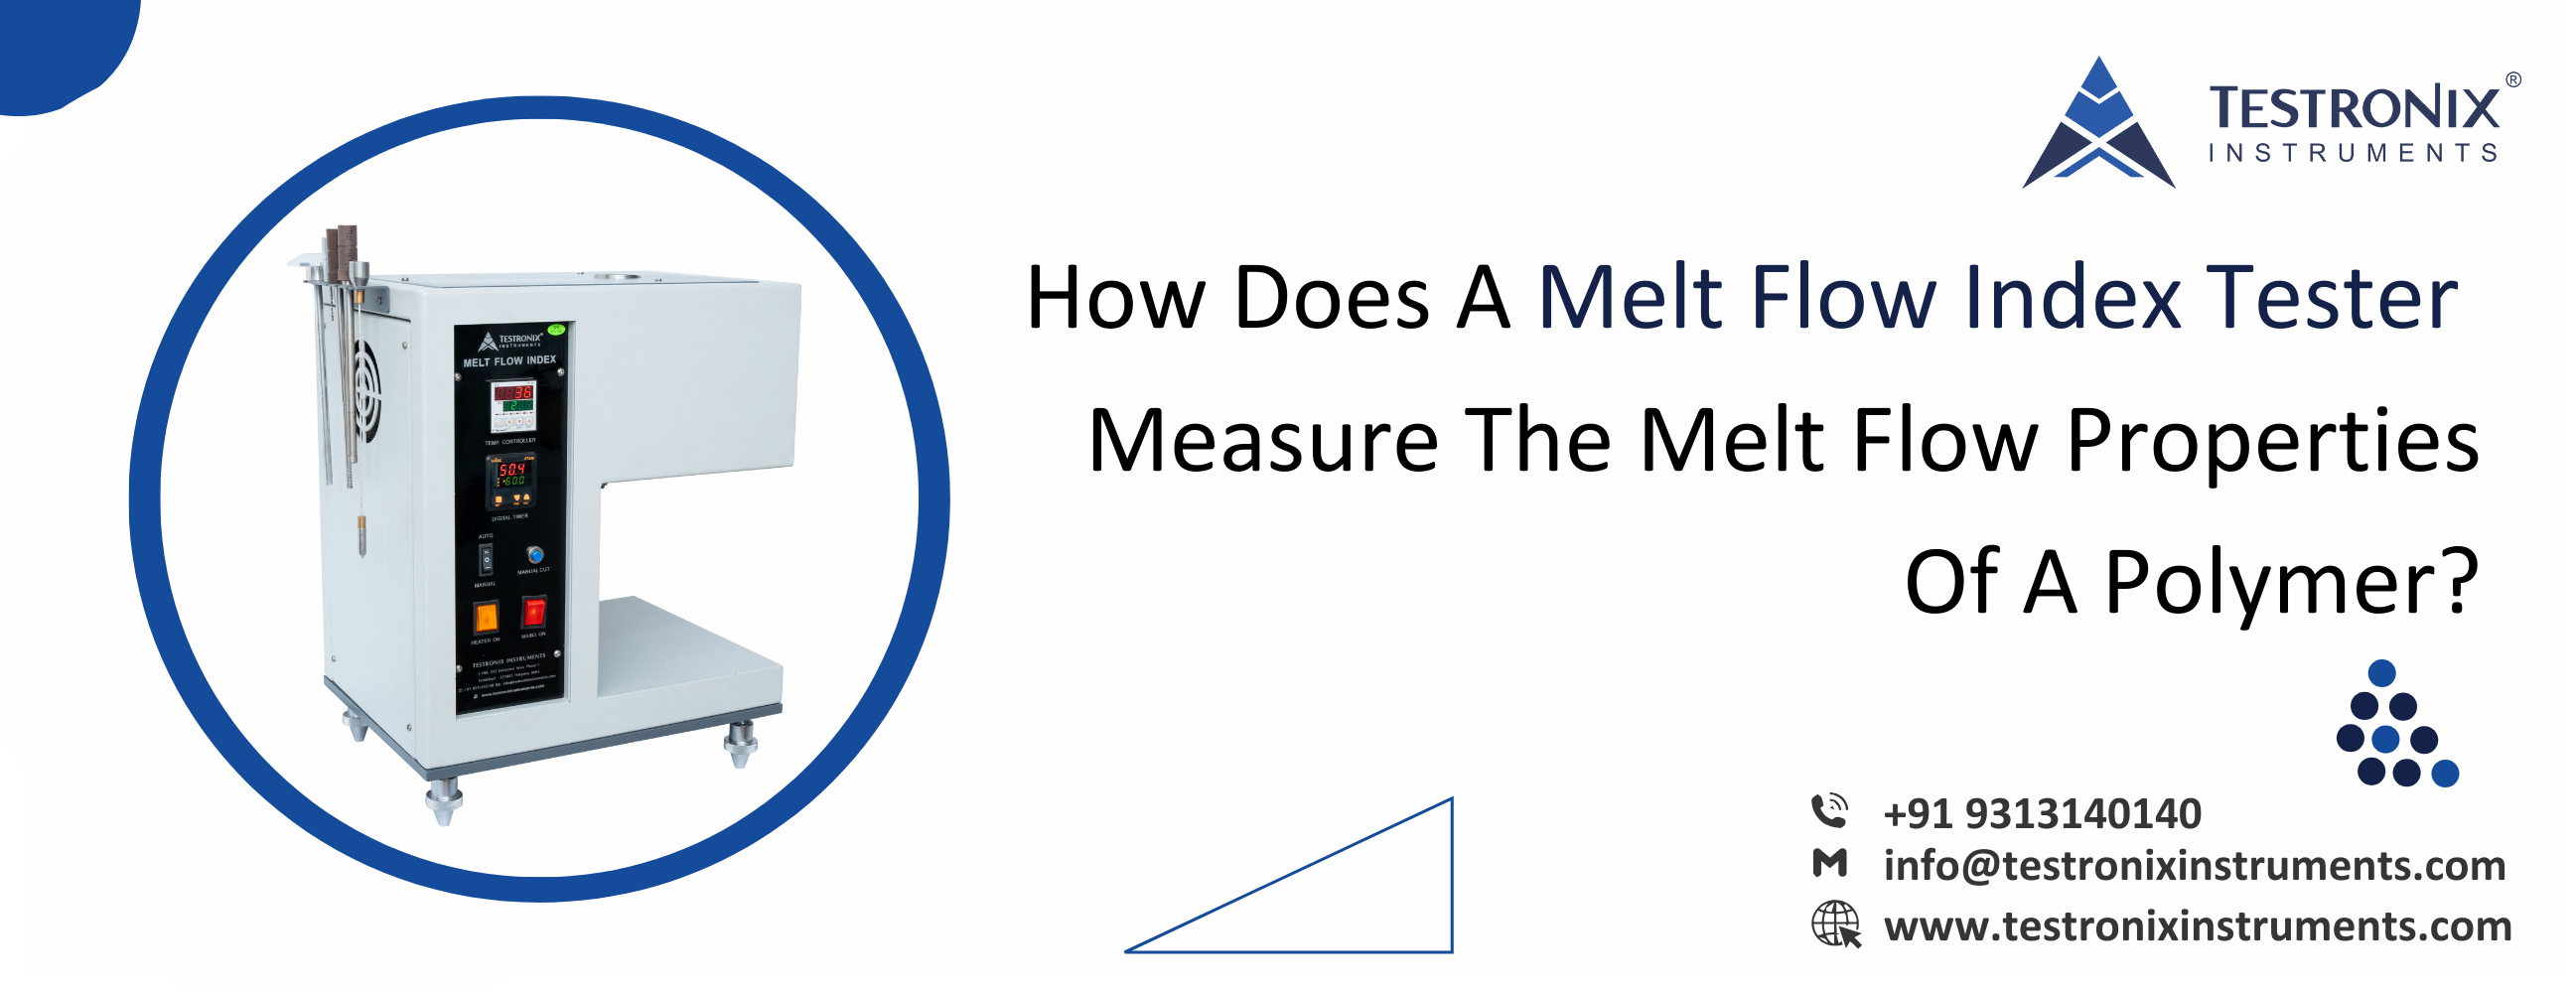 How does a melt flow index tester measure the melt flow properties of a polymer?